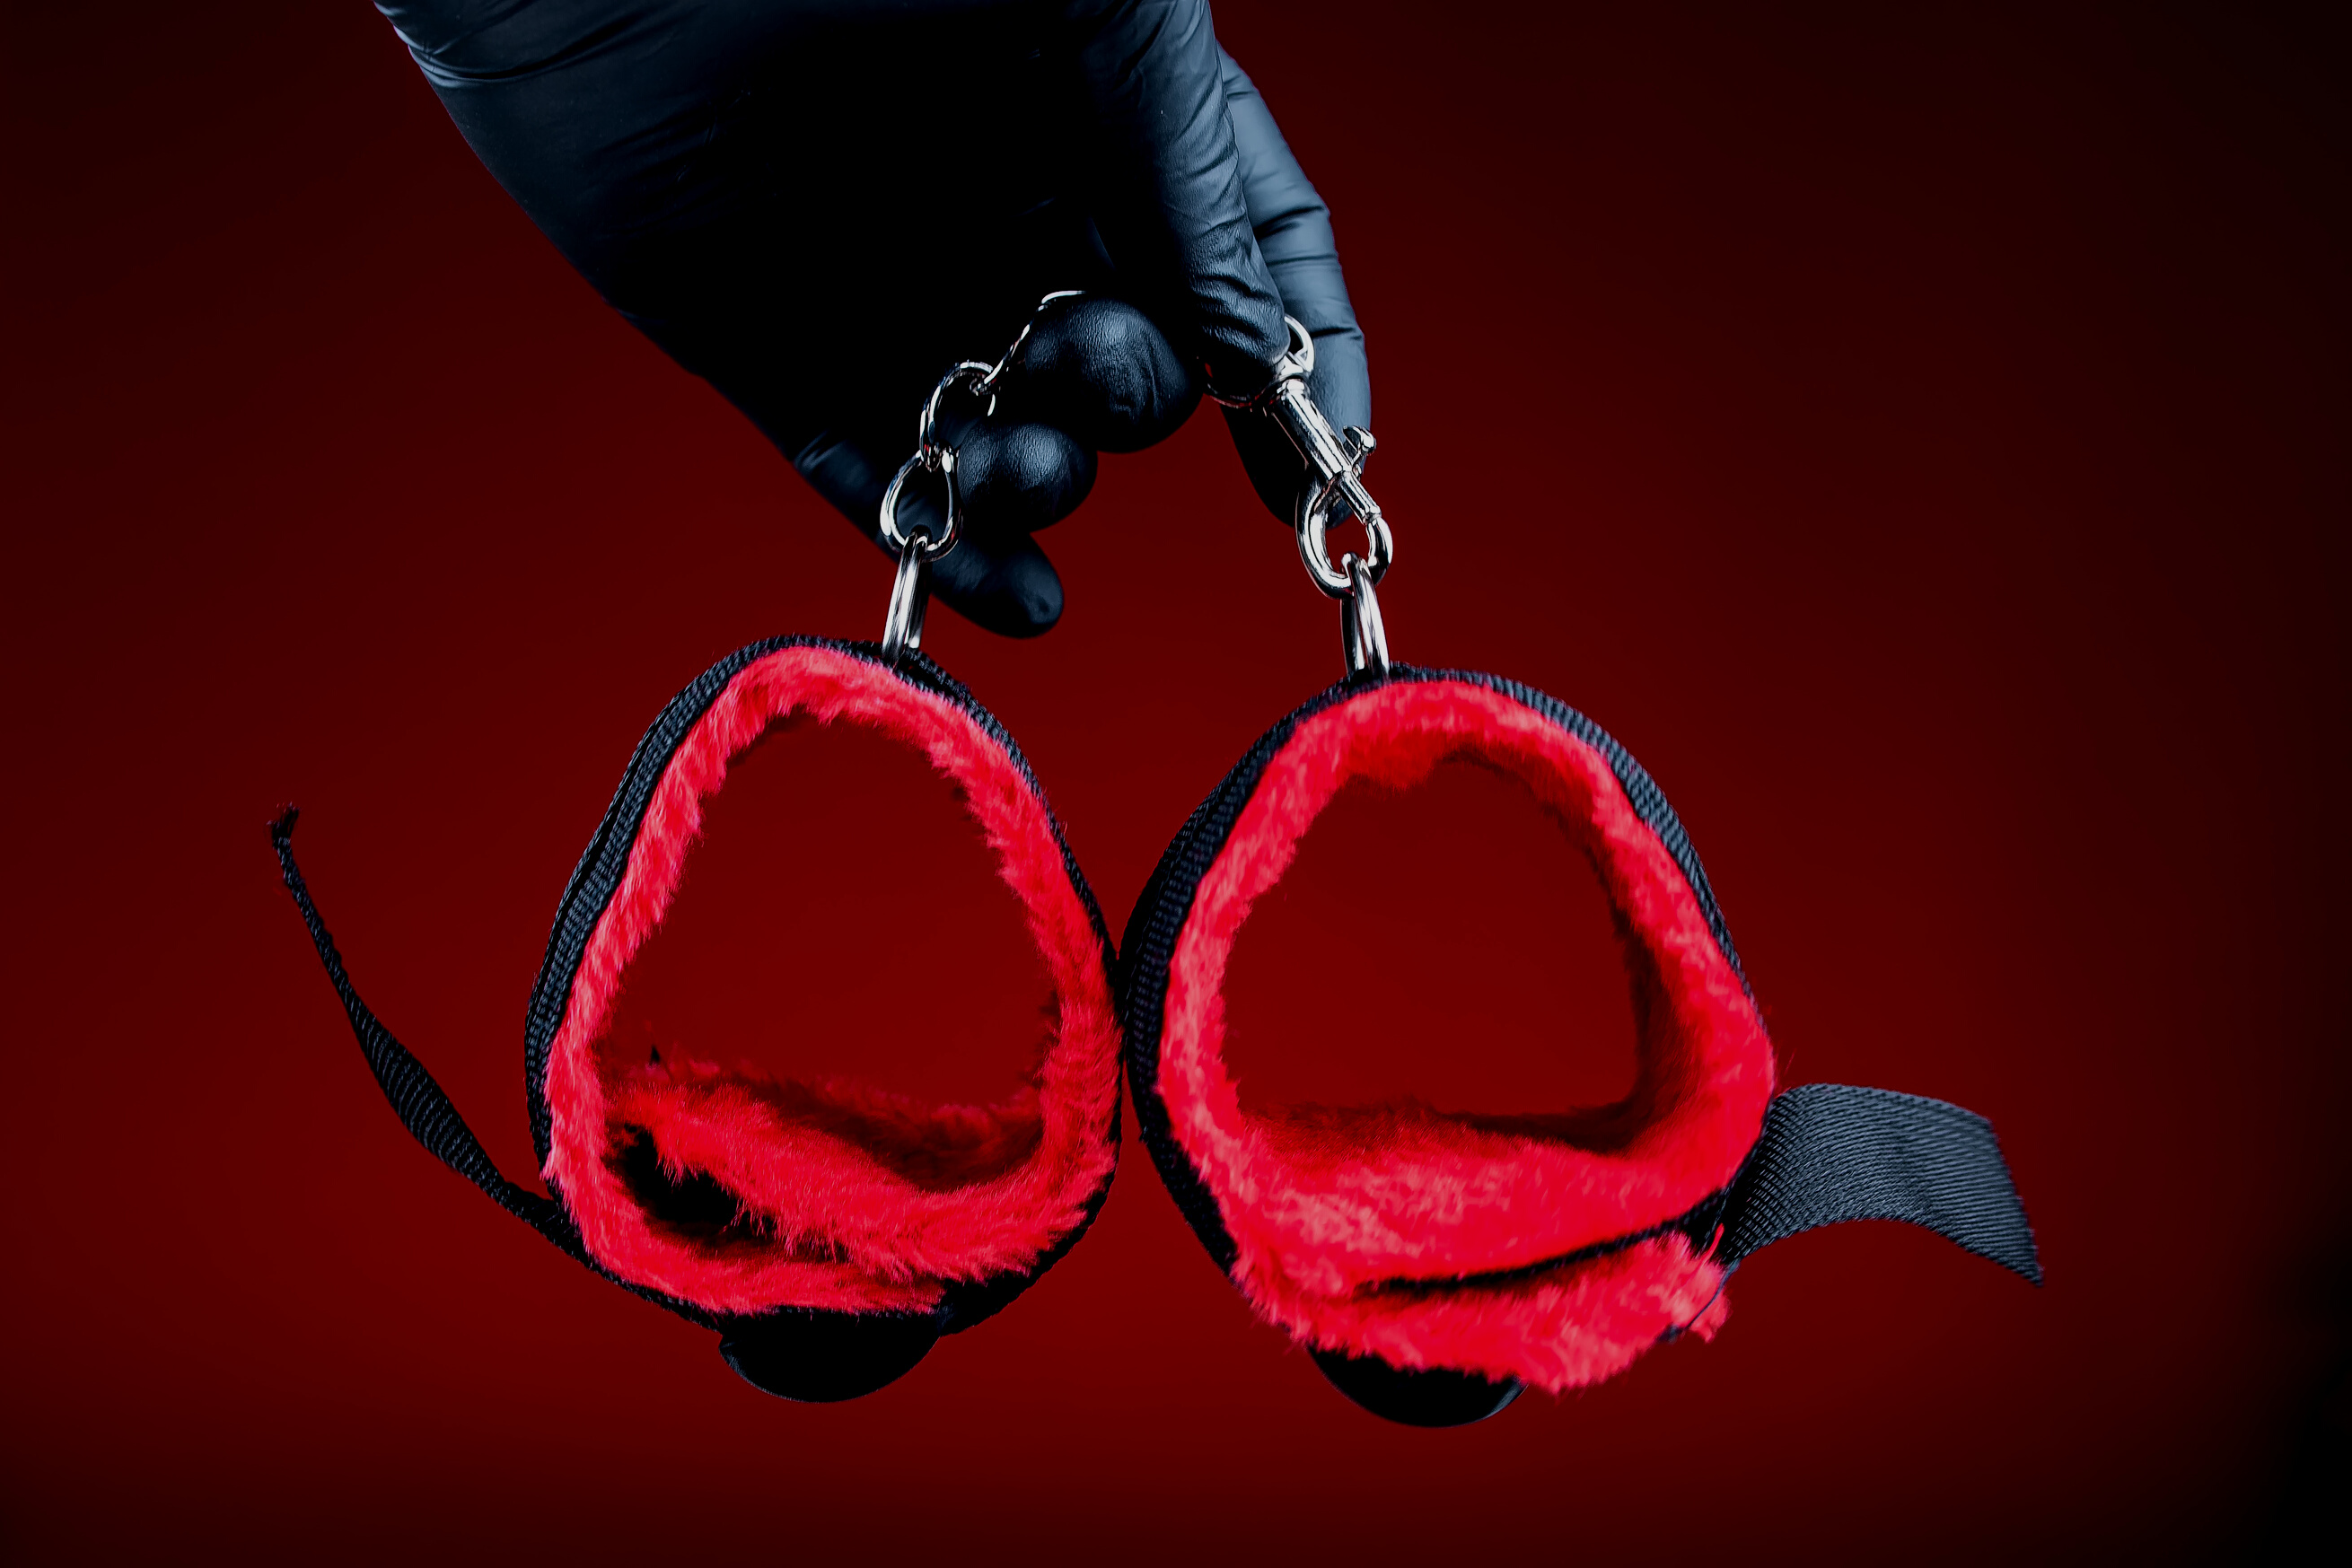 Hands in Black Gloves Holding Handcuffs with Red Belts for